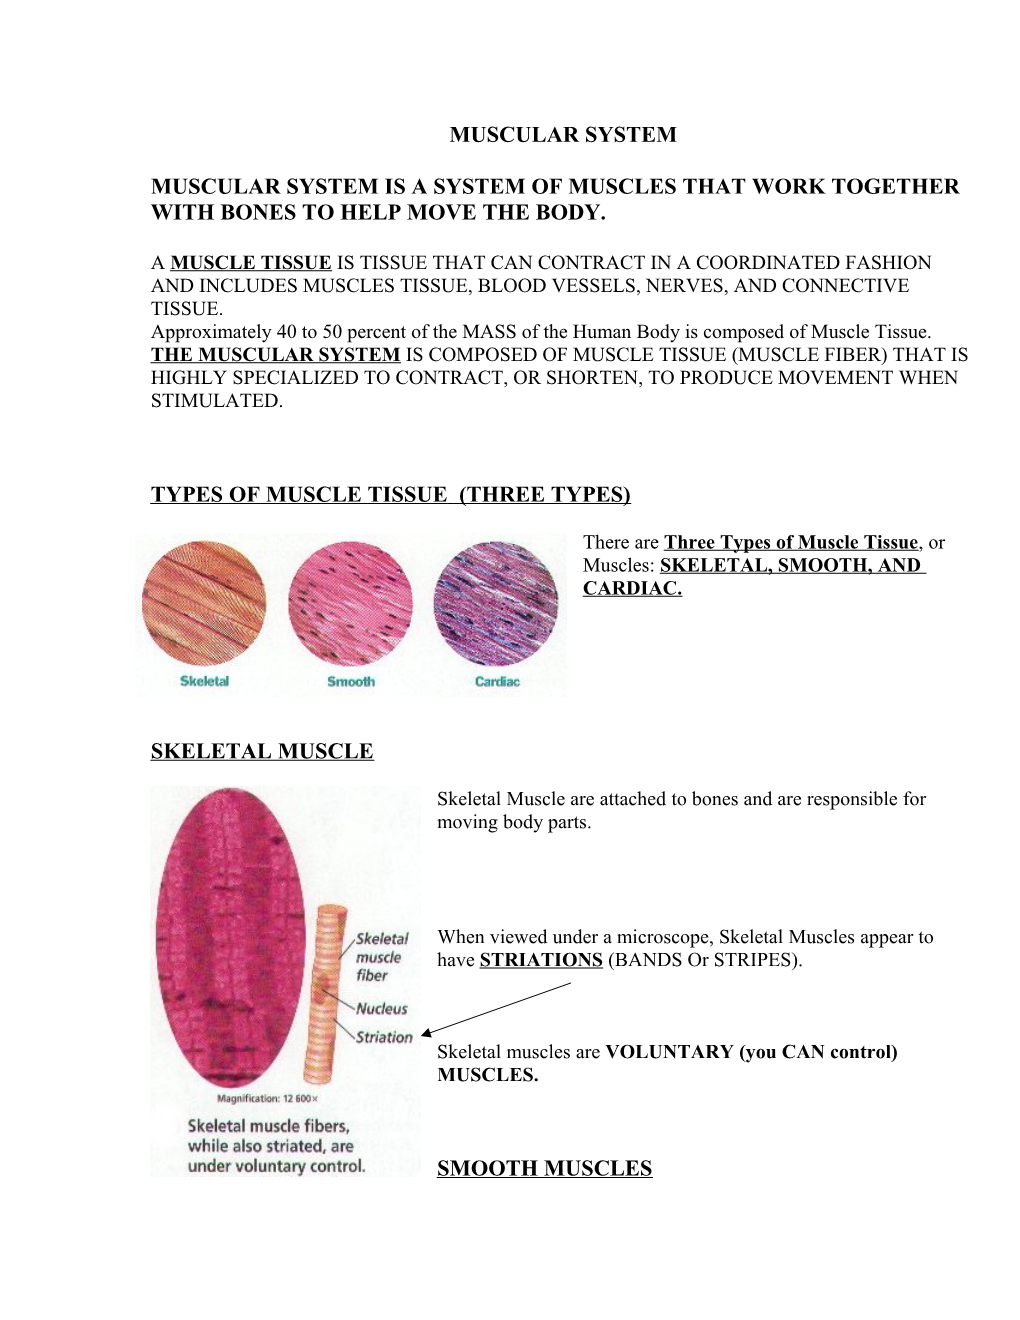 Muscular System Is a System of Muscles That Work Together with Bones to Help Move the Body